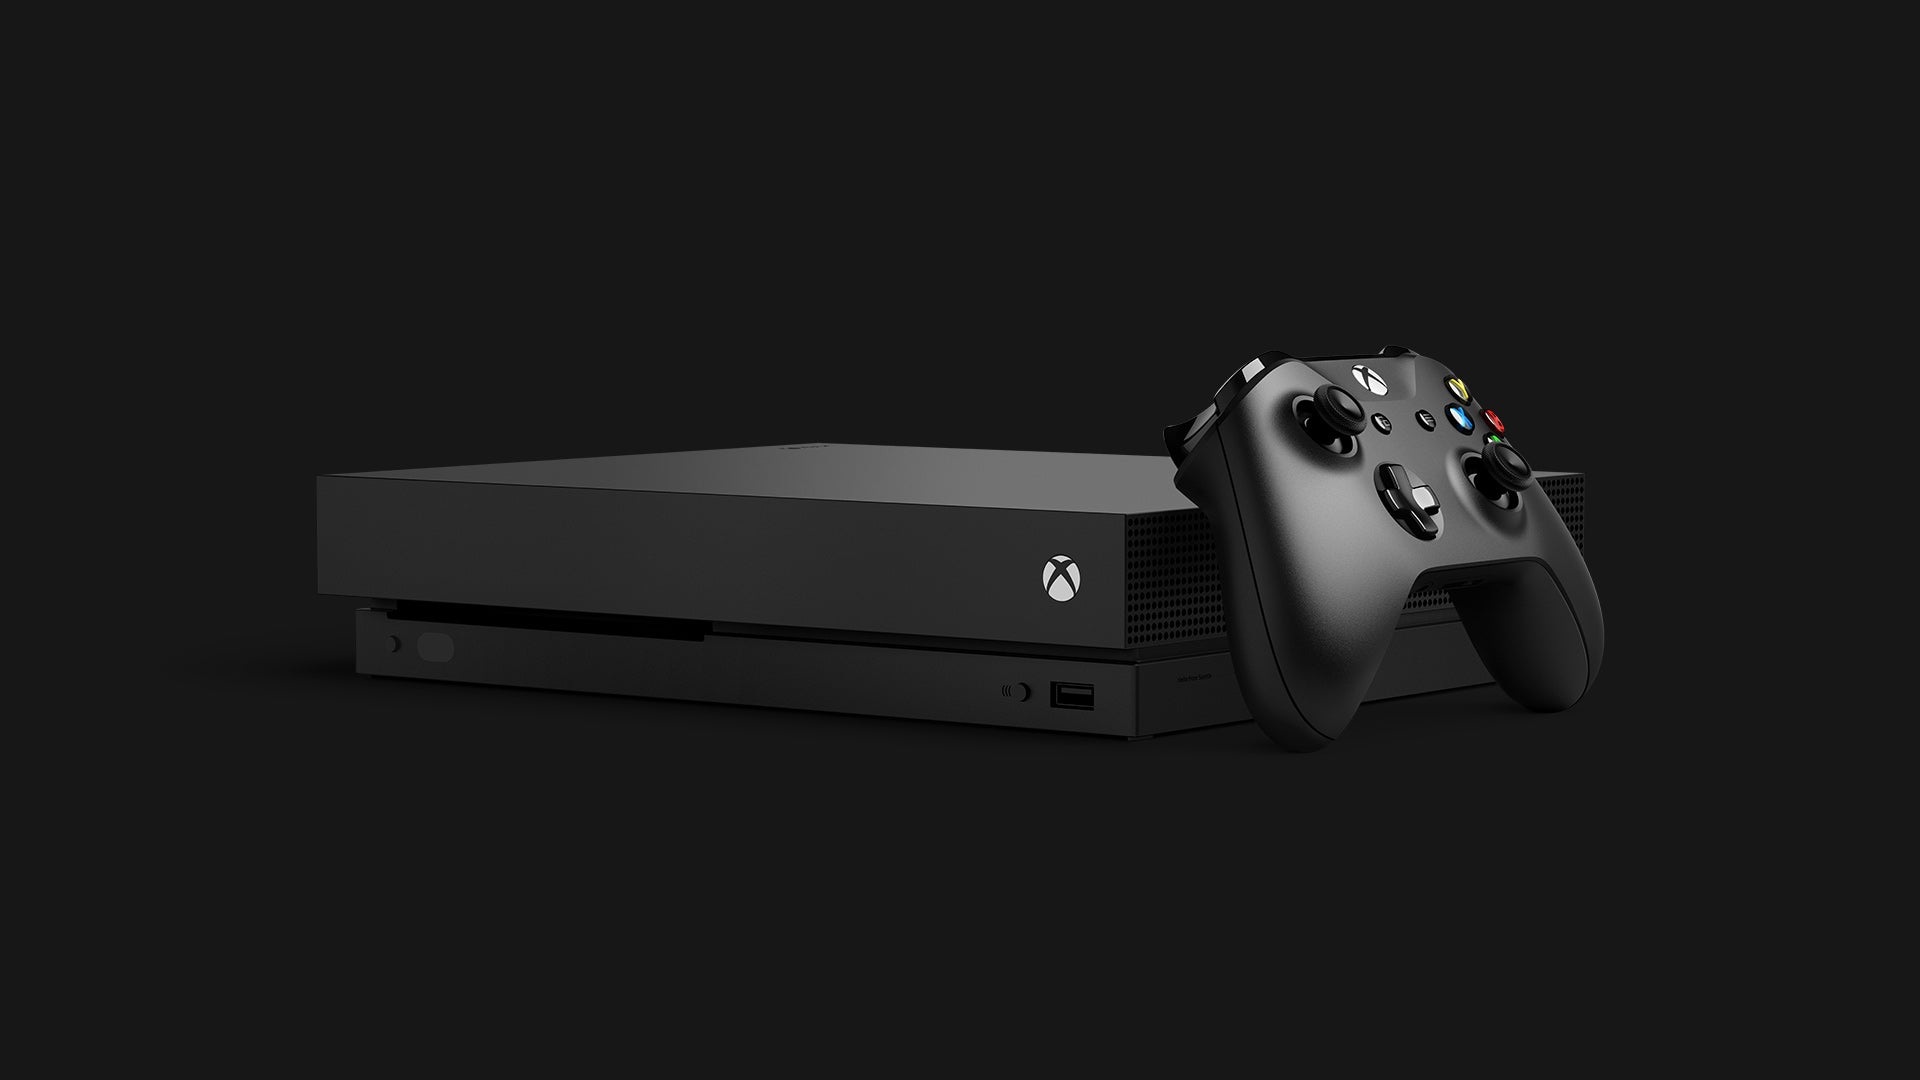 PS4 Pro vs Xbox One X: Which 4K console should you buy right now?